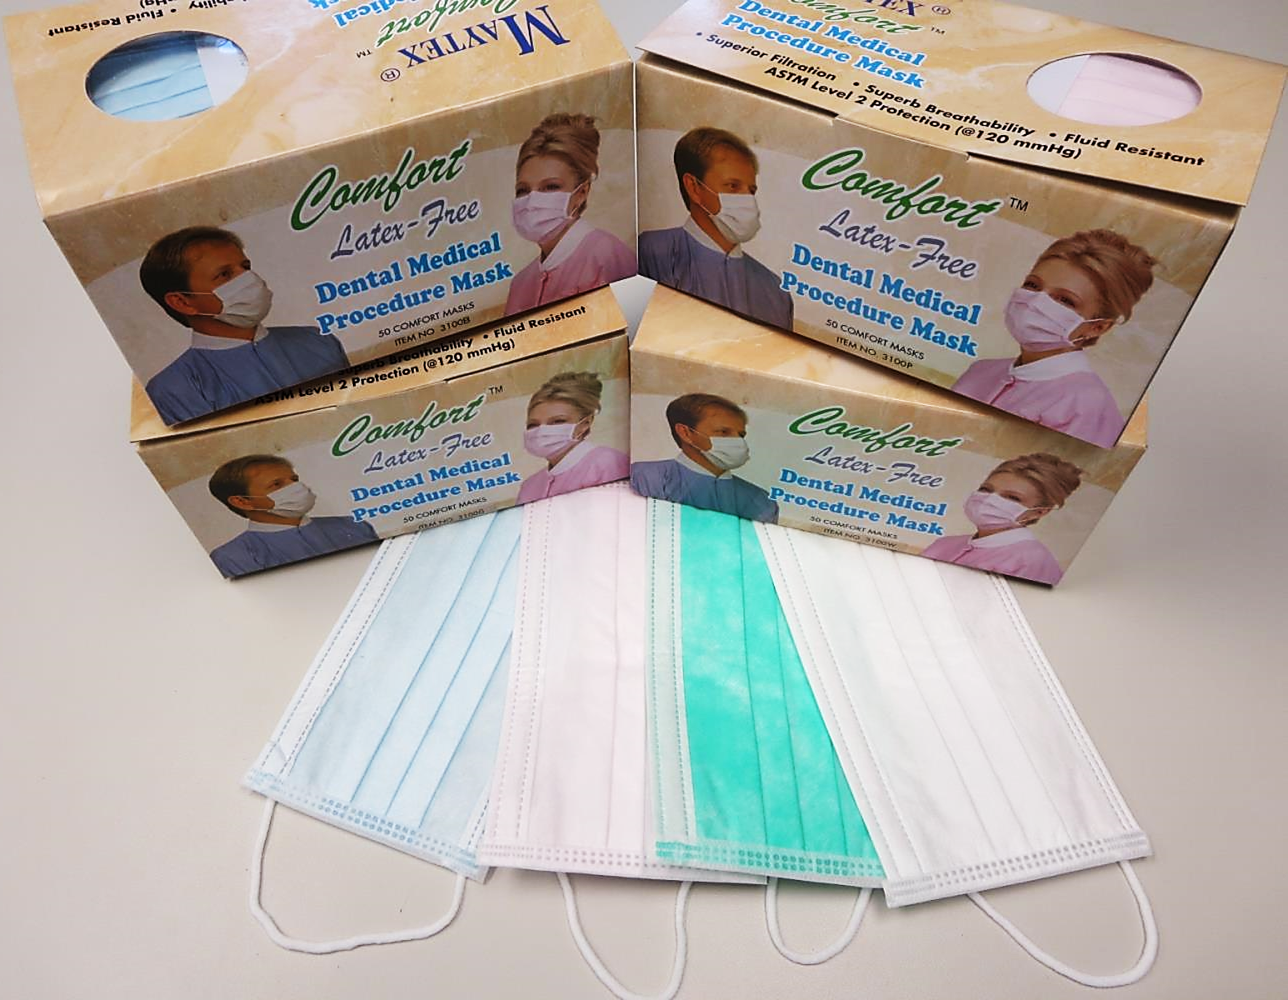 Fisherbrand™ Disposable Face Mask